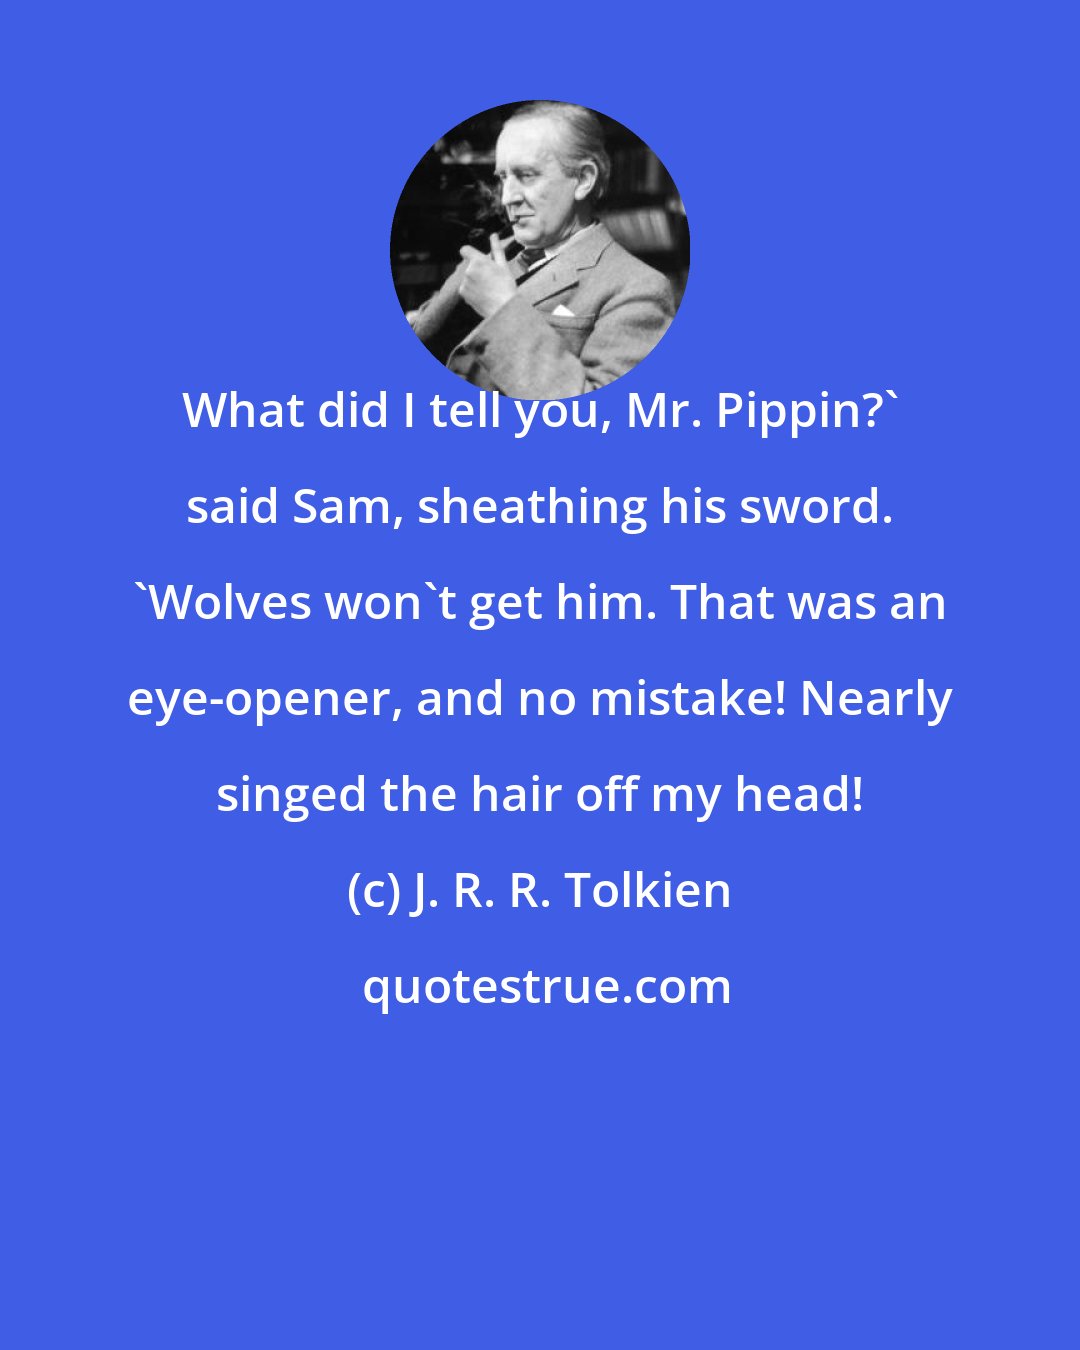 J. R. R. Tolkien: What did I tell you, Mr. Pippin?' said Sam, sheathing his sword. 'Wolves won't get him. That was an eye-opener, and no mistake! Nearly singed the hair off my head!